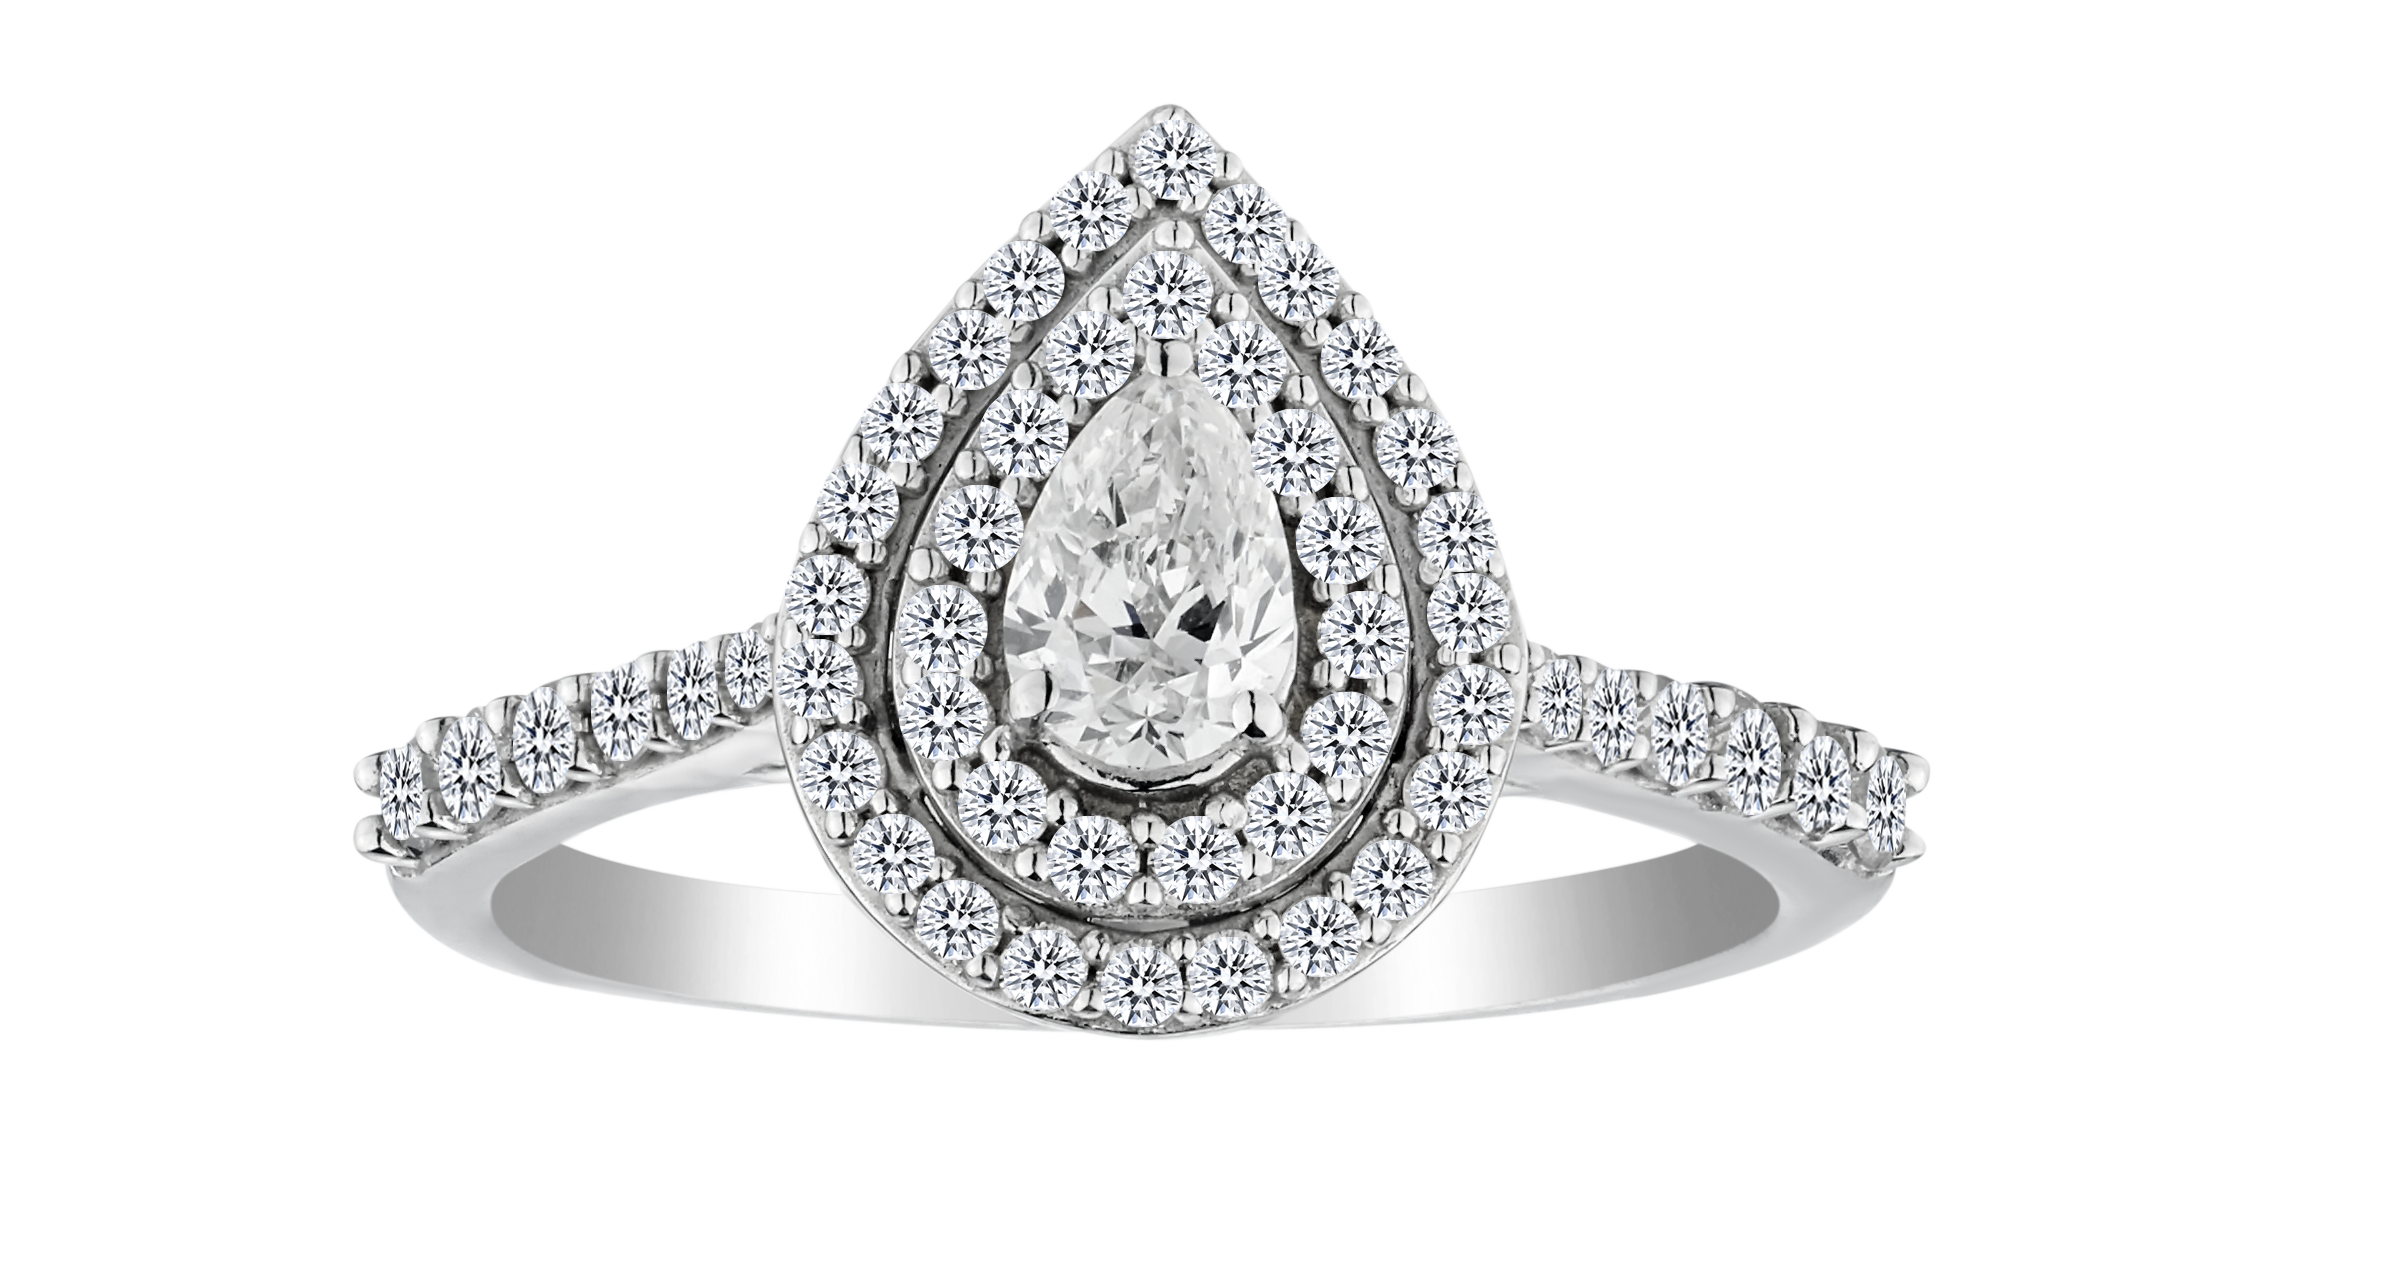 .75 Total Diamond Weight Double Halo Pear Shape Ring, .33 Carat Pear Cut Centre, 14kt White Gold. Griffin Jewellery Designs